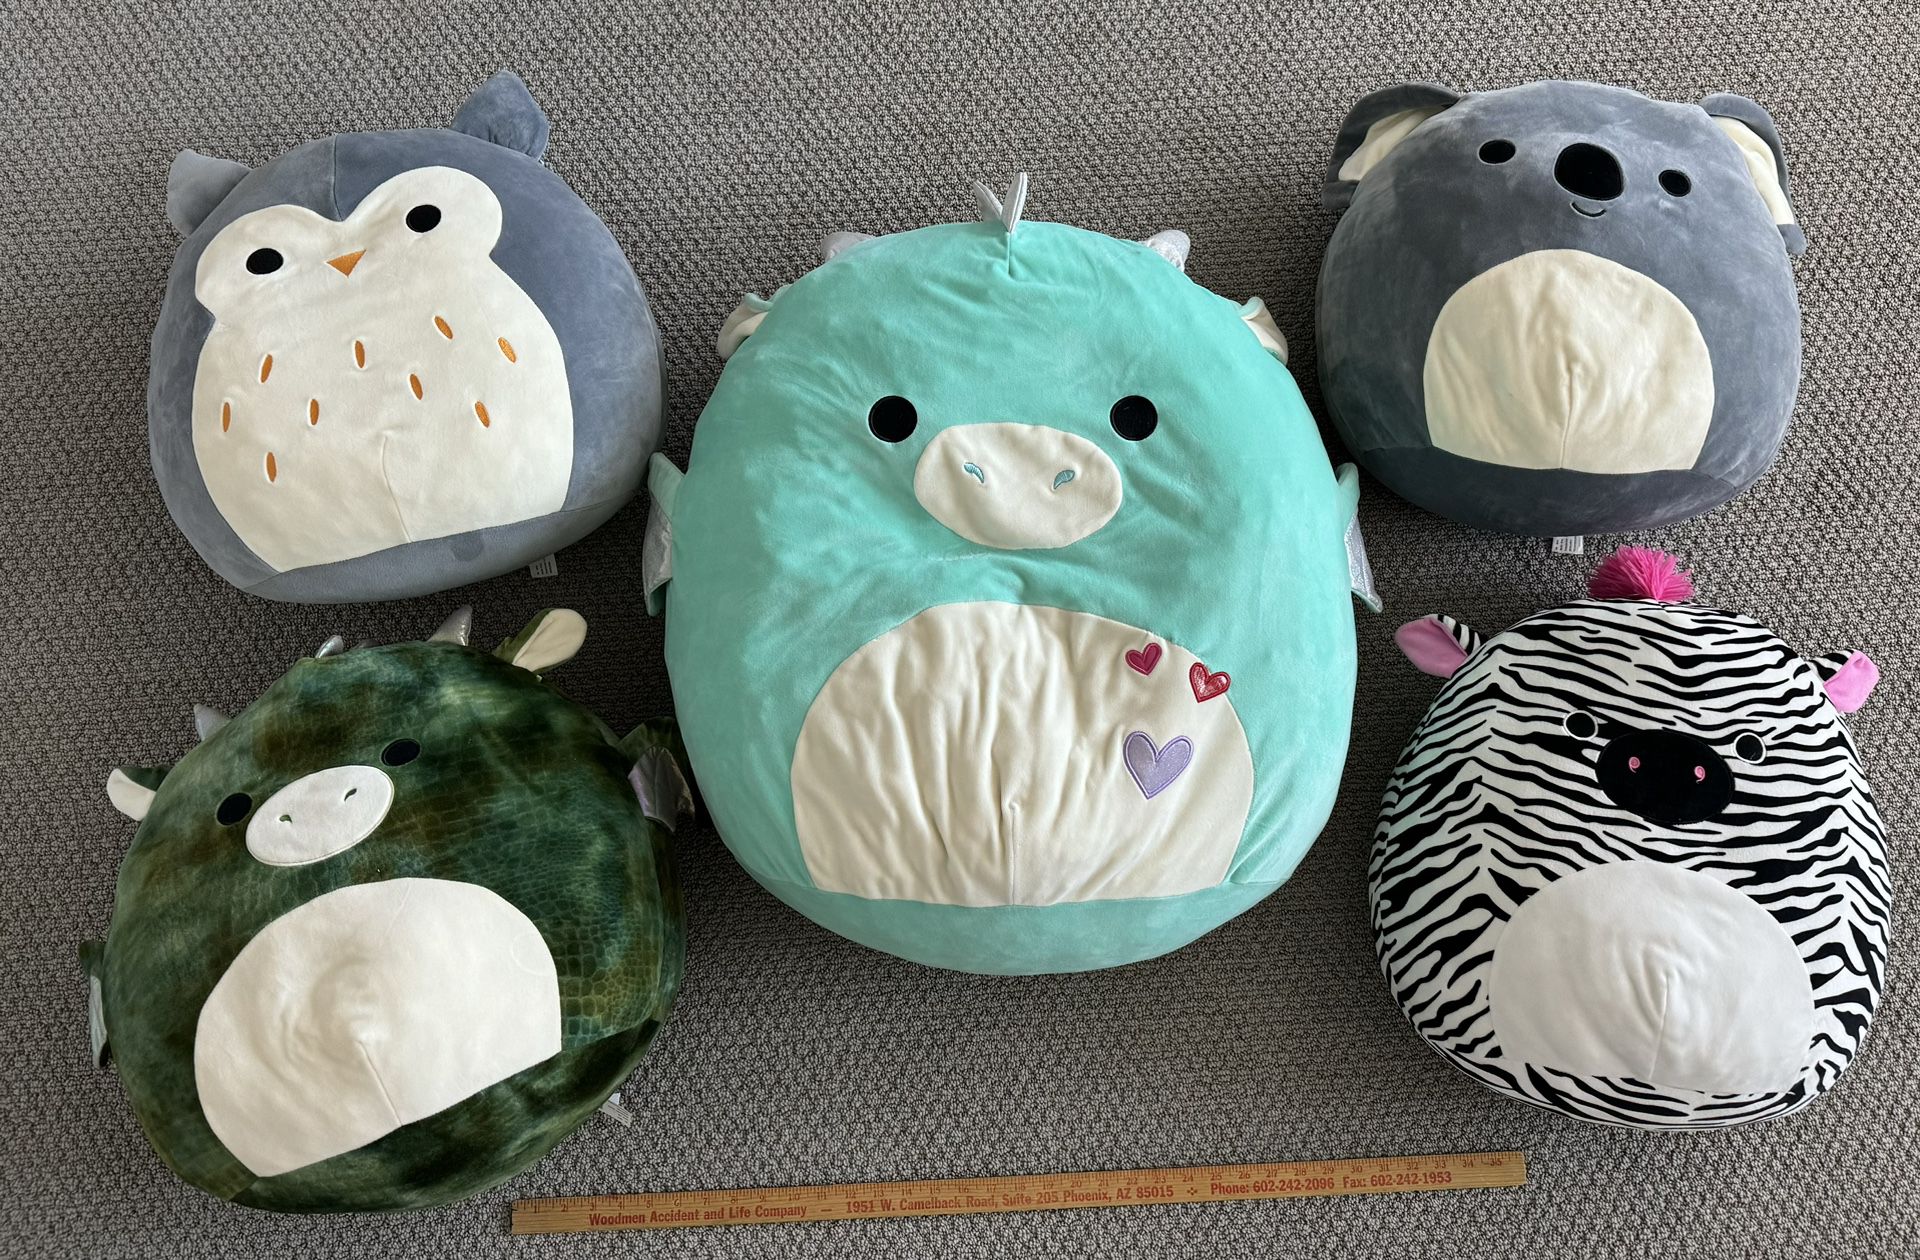 Large/XL Squishmallows